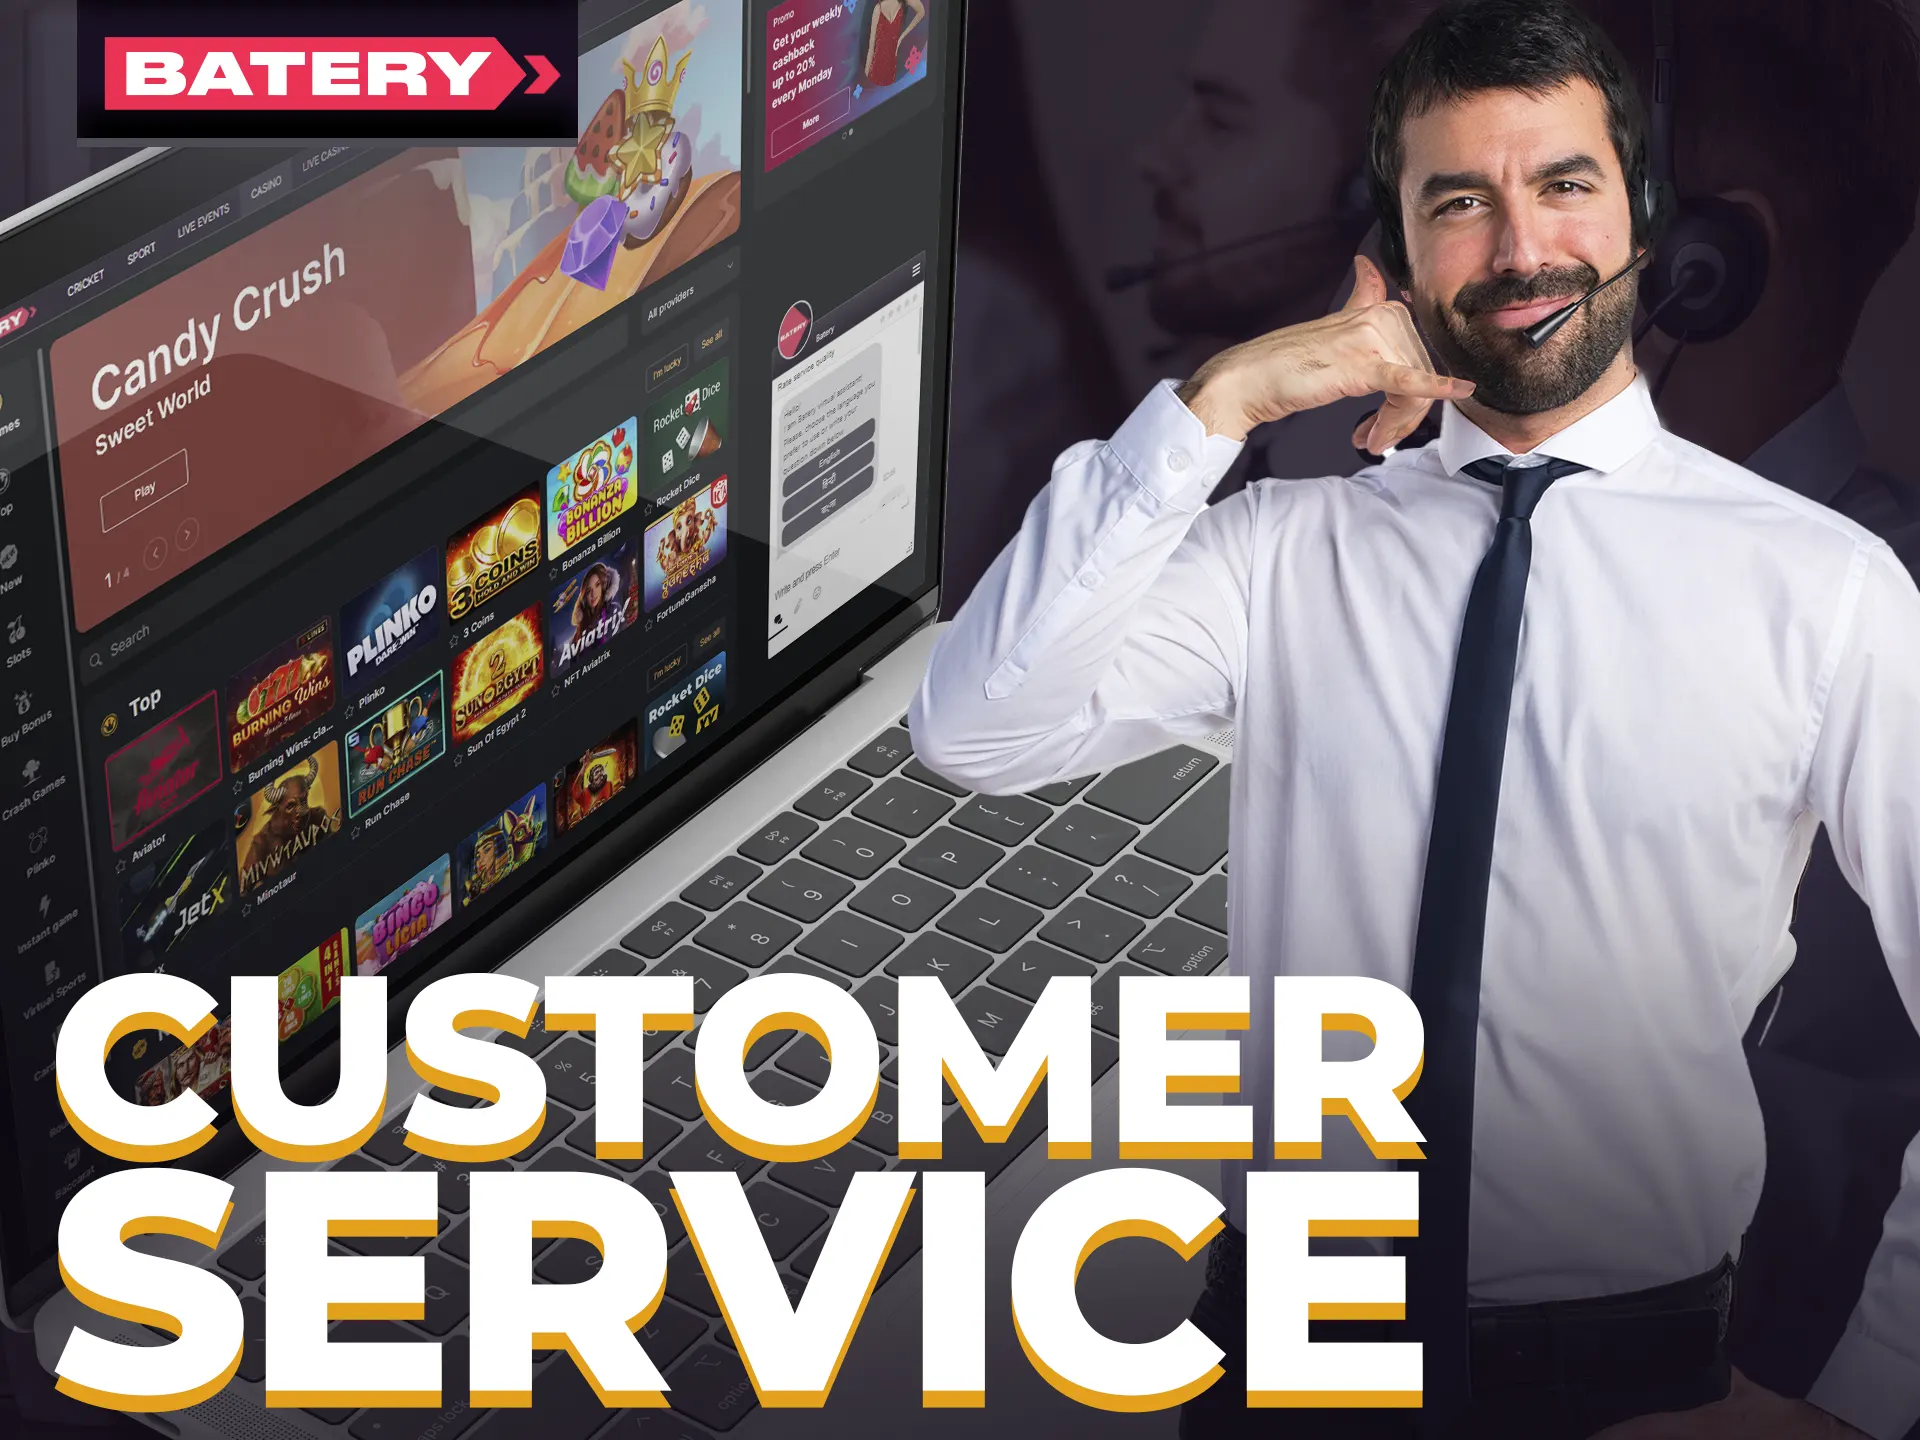 Email at or use live chat for quick assistance from Batery customer service.